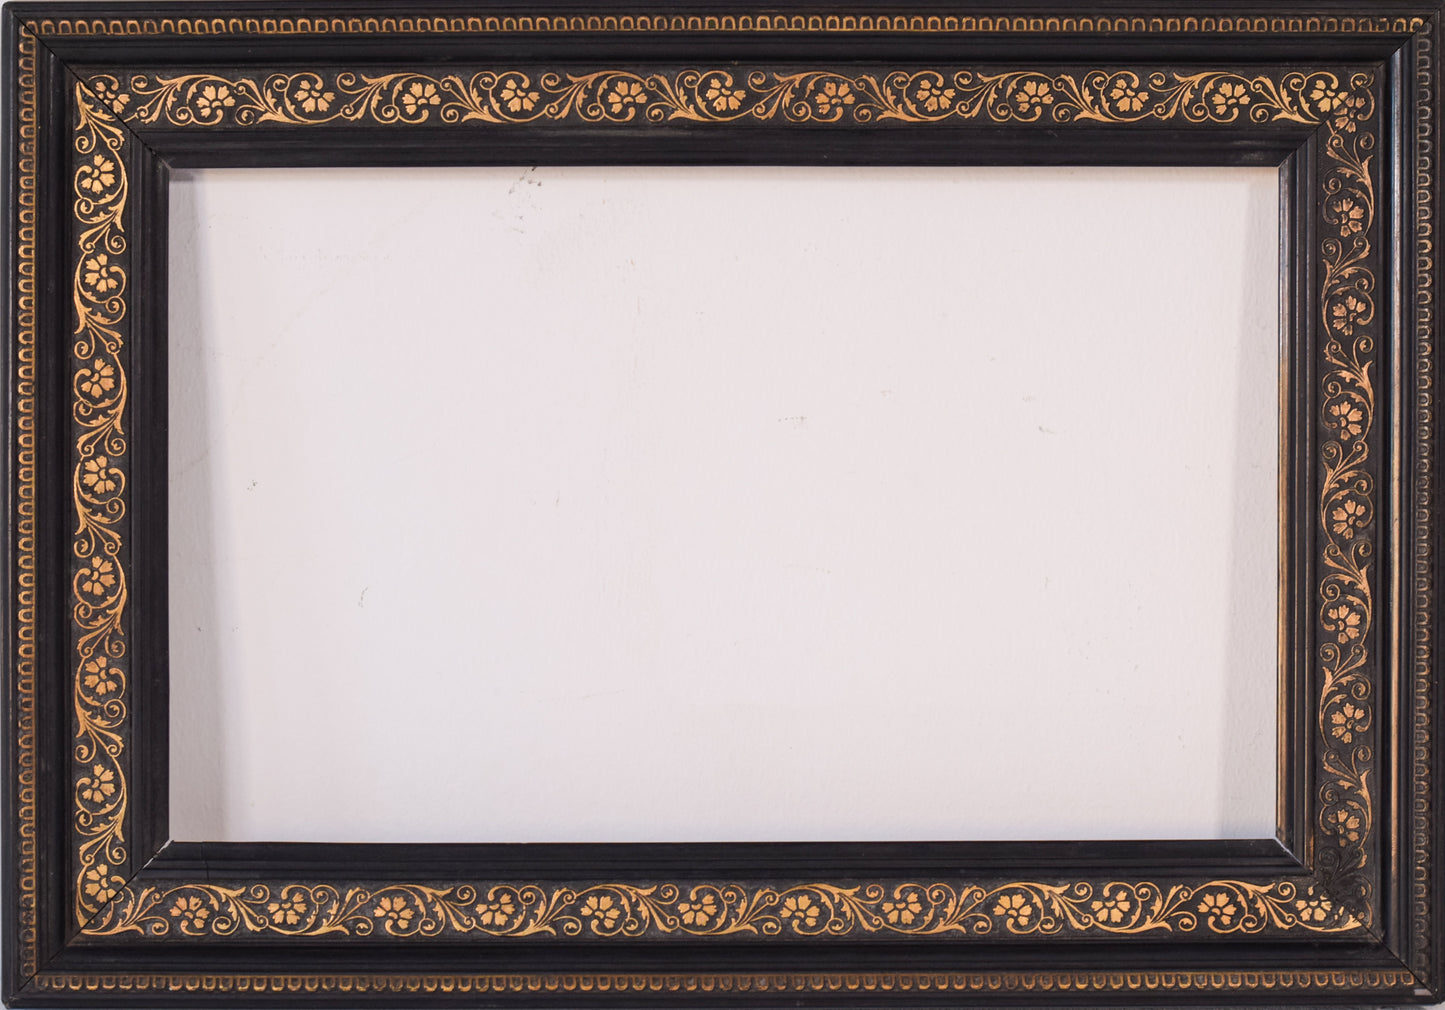 Pair of Frames with Old Master Print